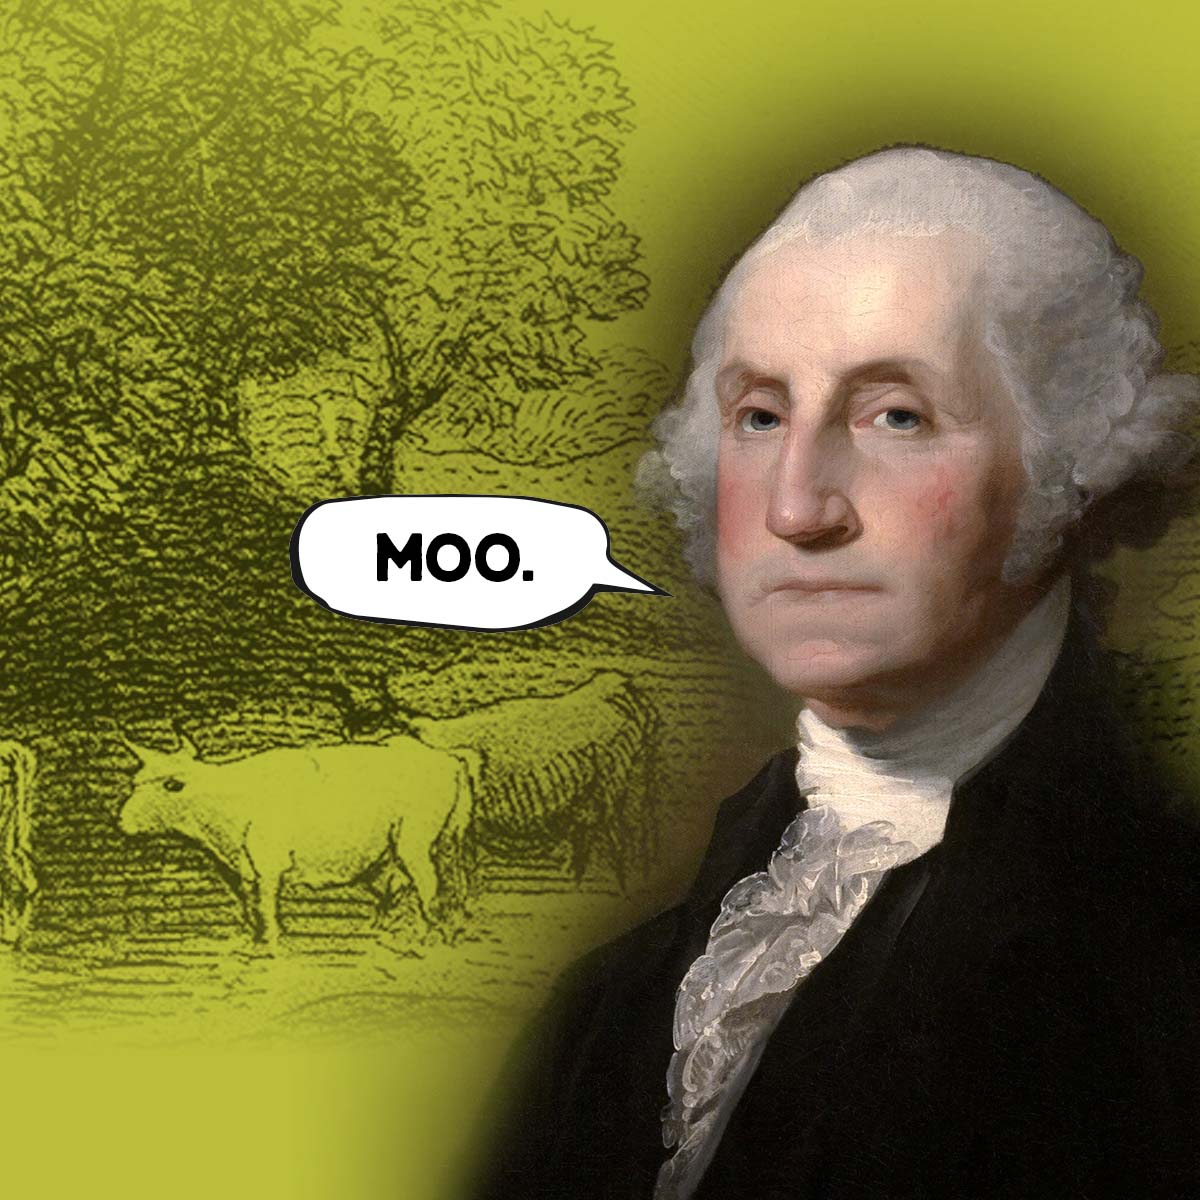 picture of george washington with a word bubble that says "moo"